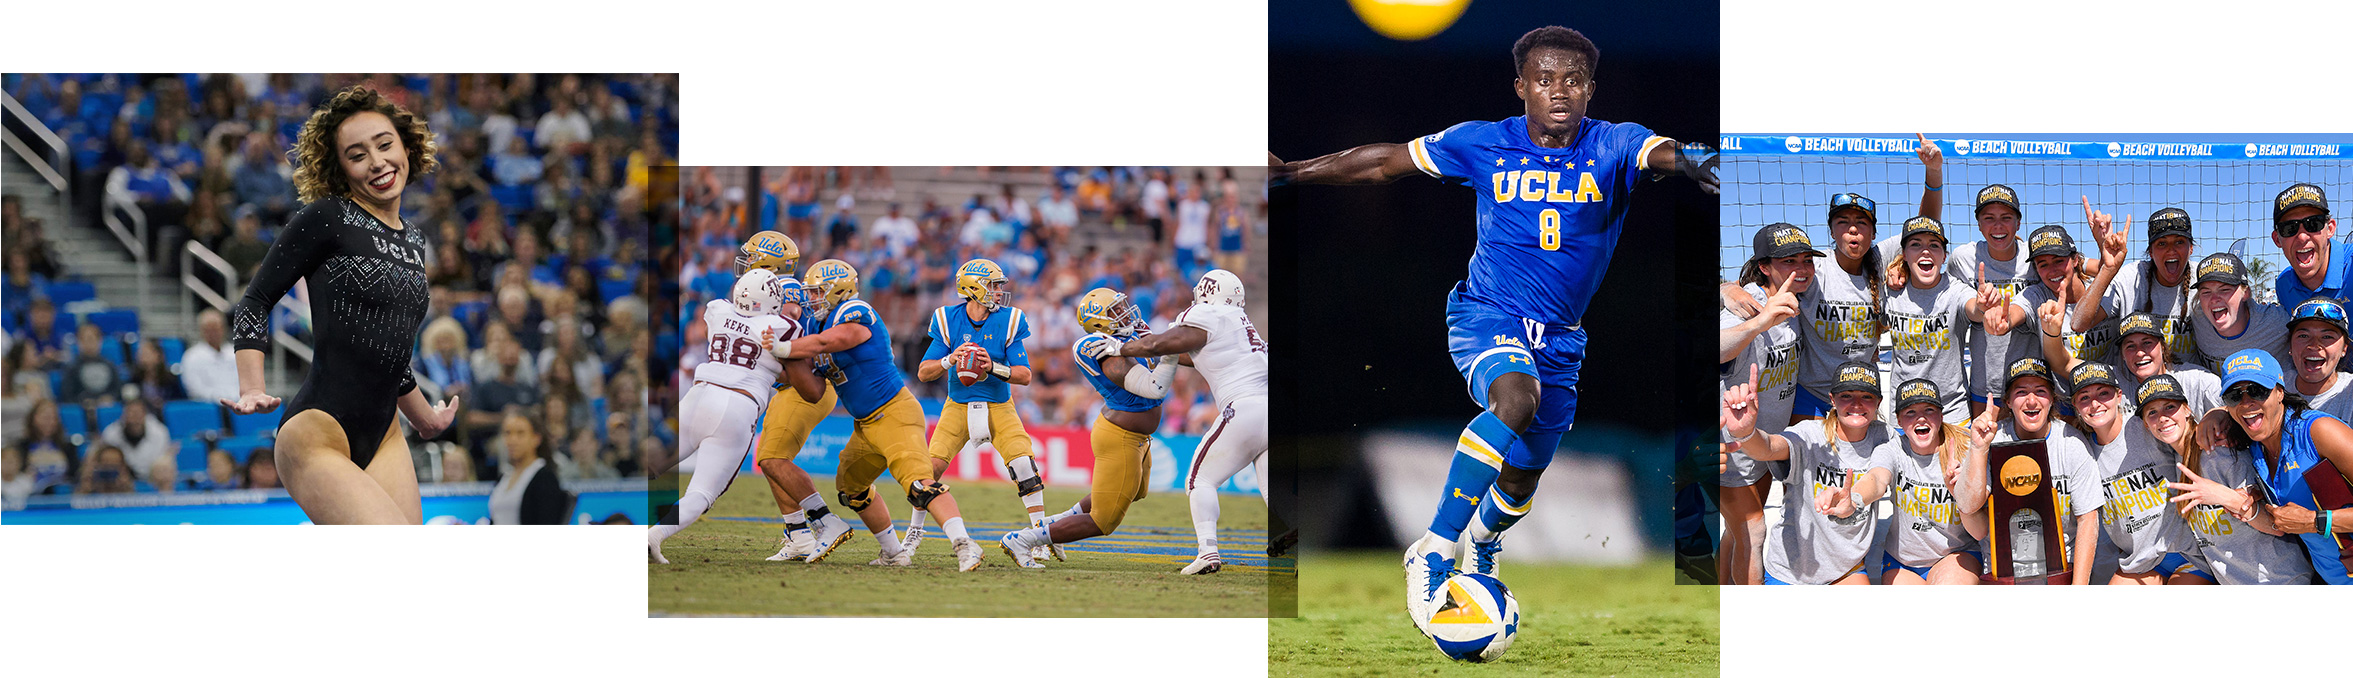 UCLA gymnastics, football, soccer and beach volleyball athletes in a four panel collage